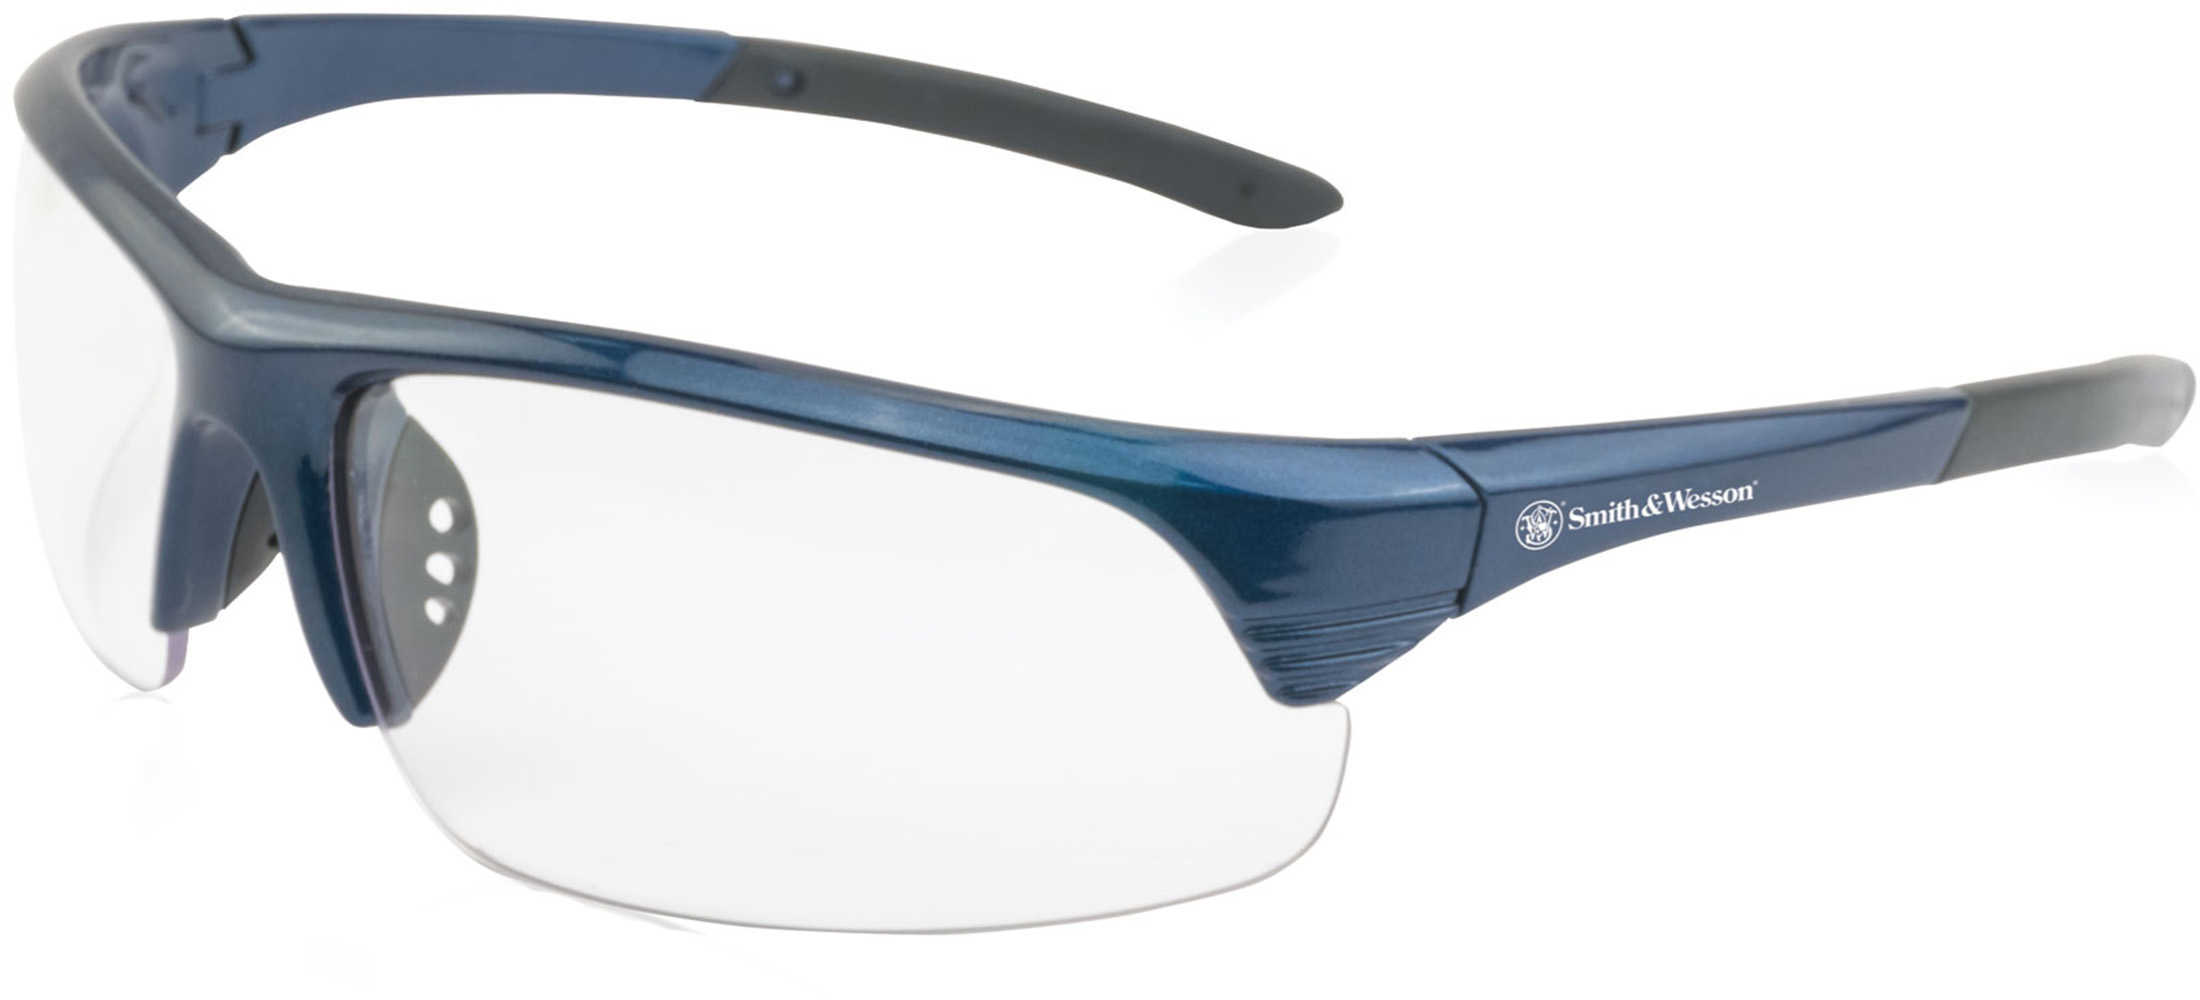 Smith & Wesson Accessories Corporal Shooting Glasses Blue Frame, Clear Lens Md: 110164